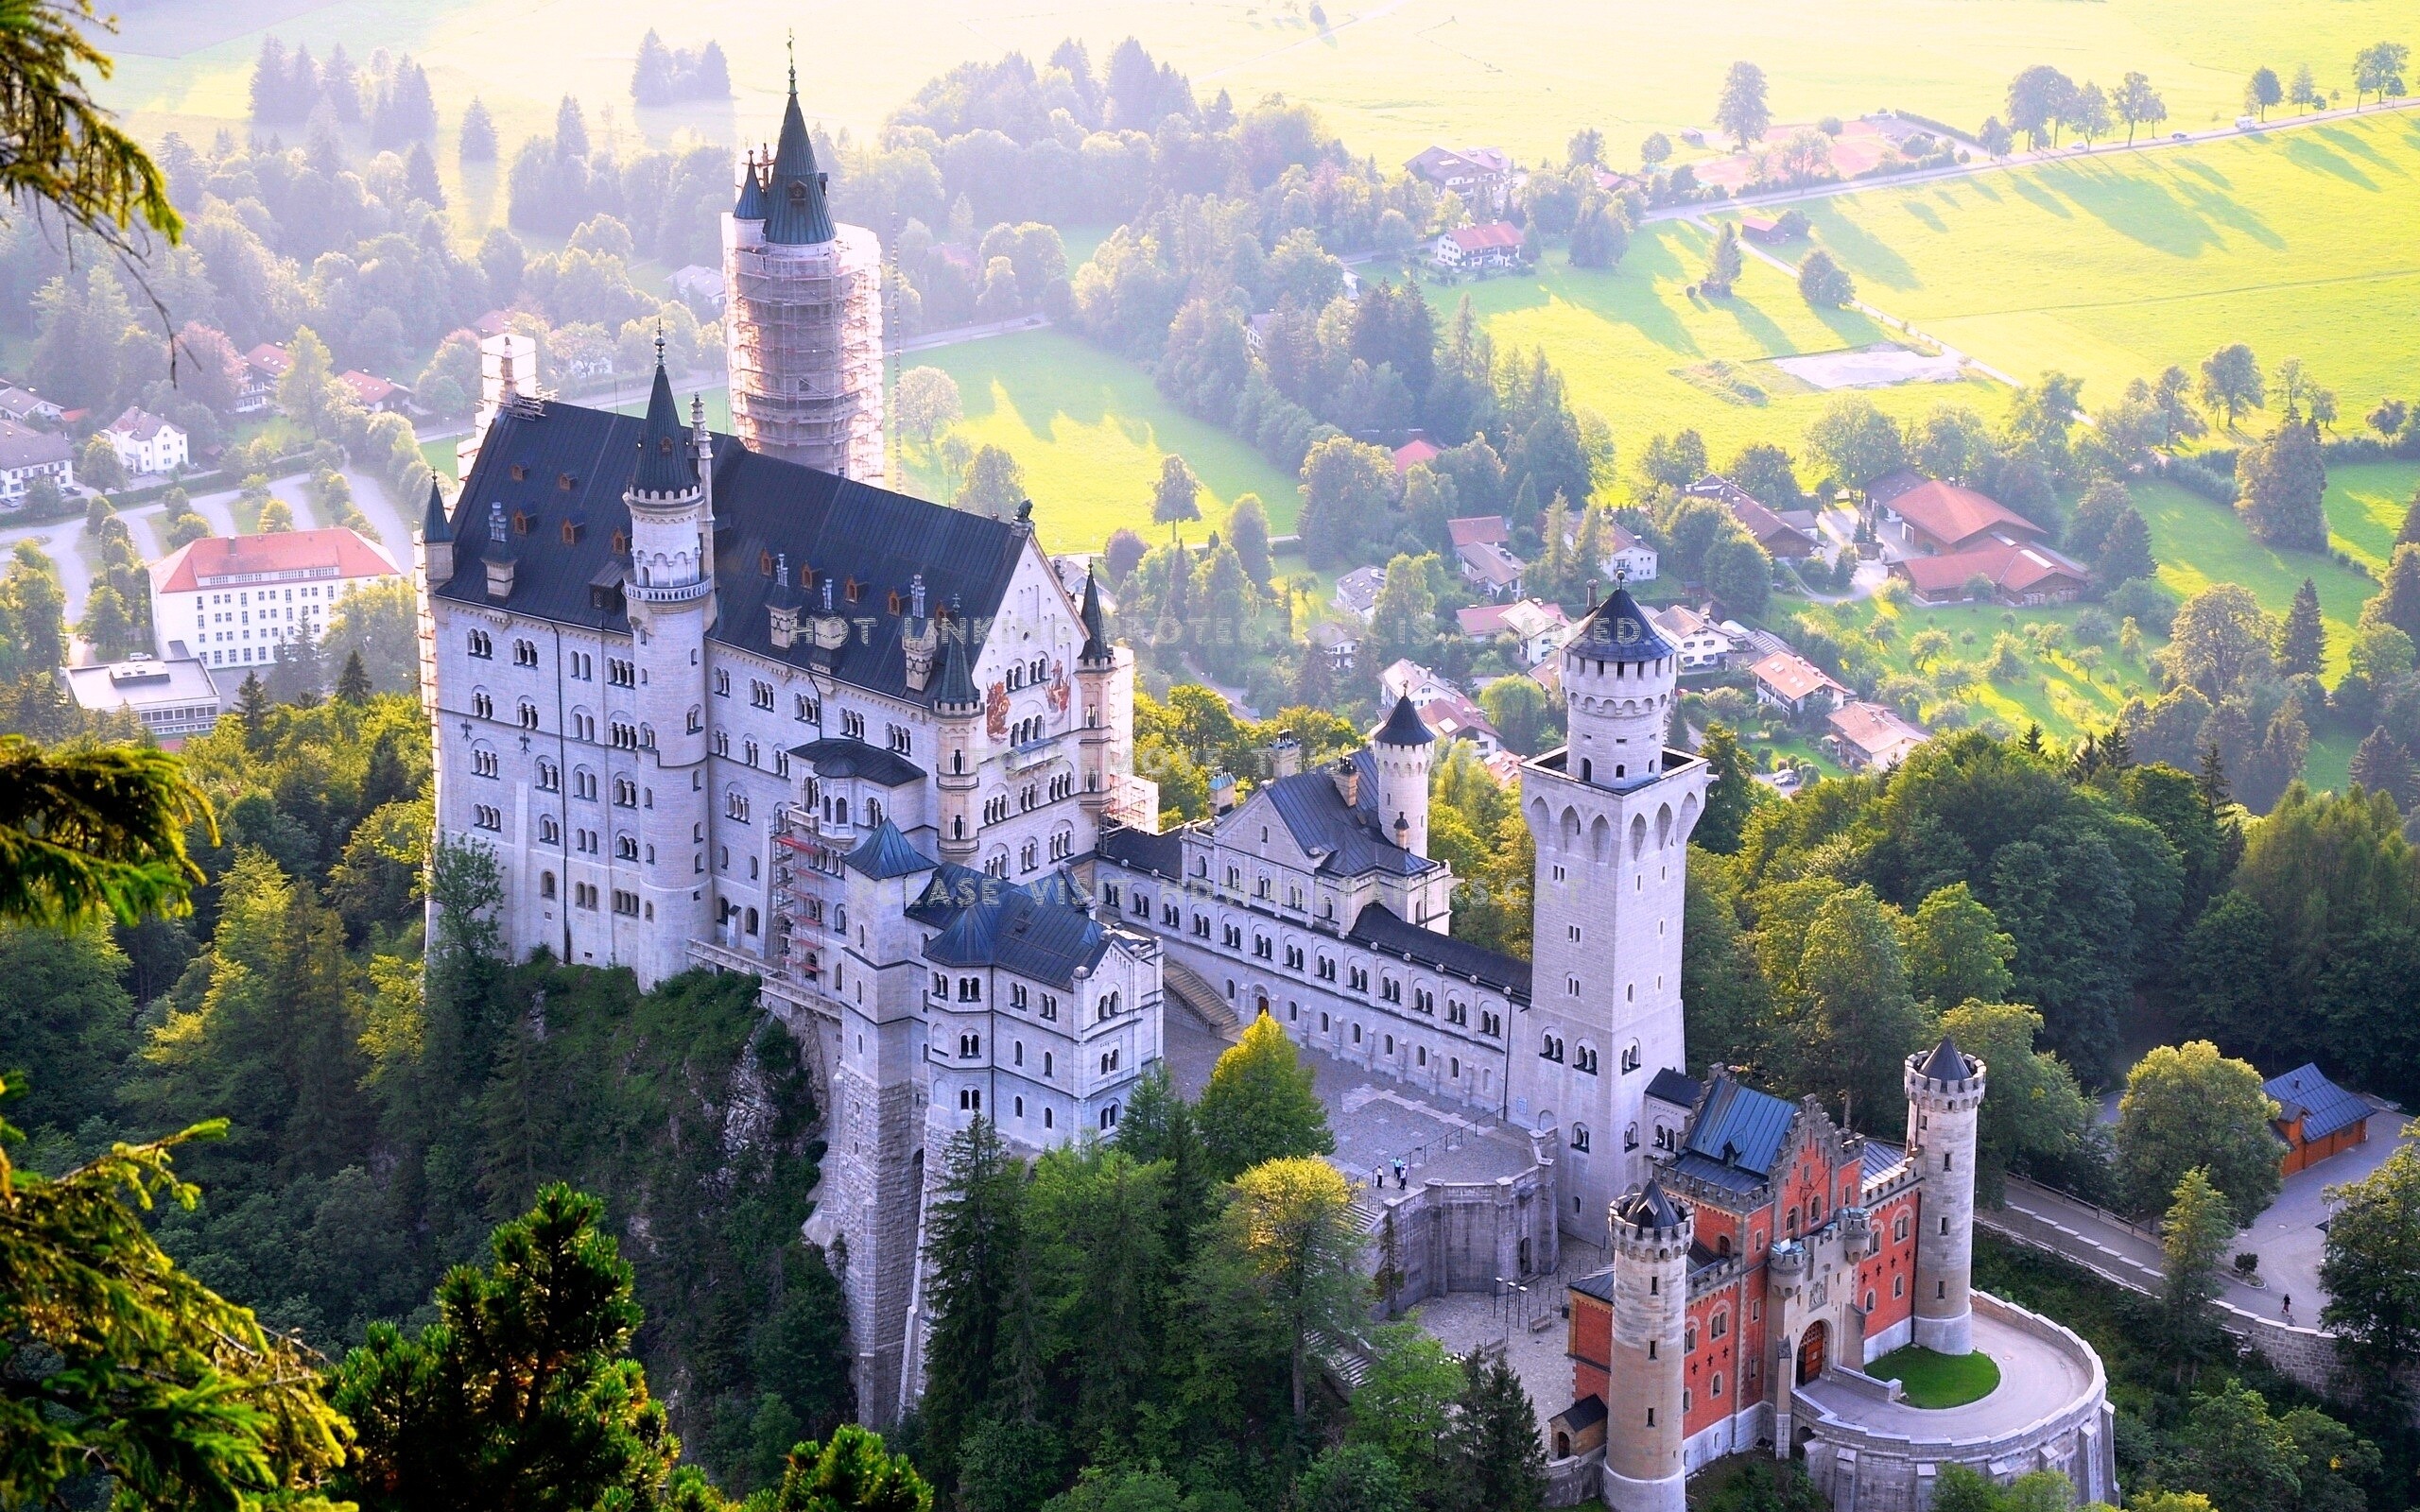 Neuschwanstein Castle: The palace of a famous Bavarian king, Aerial view. 2560x1600 HD Wallpaper.